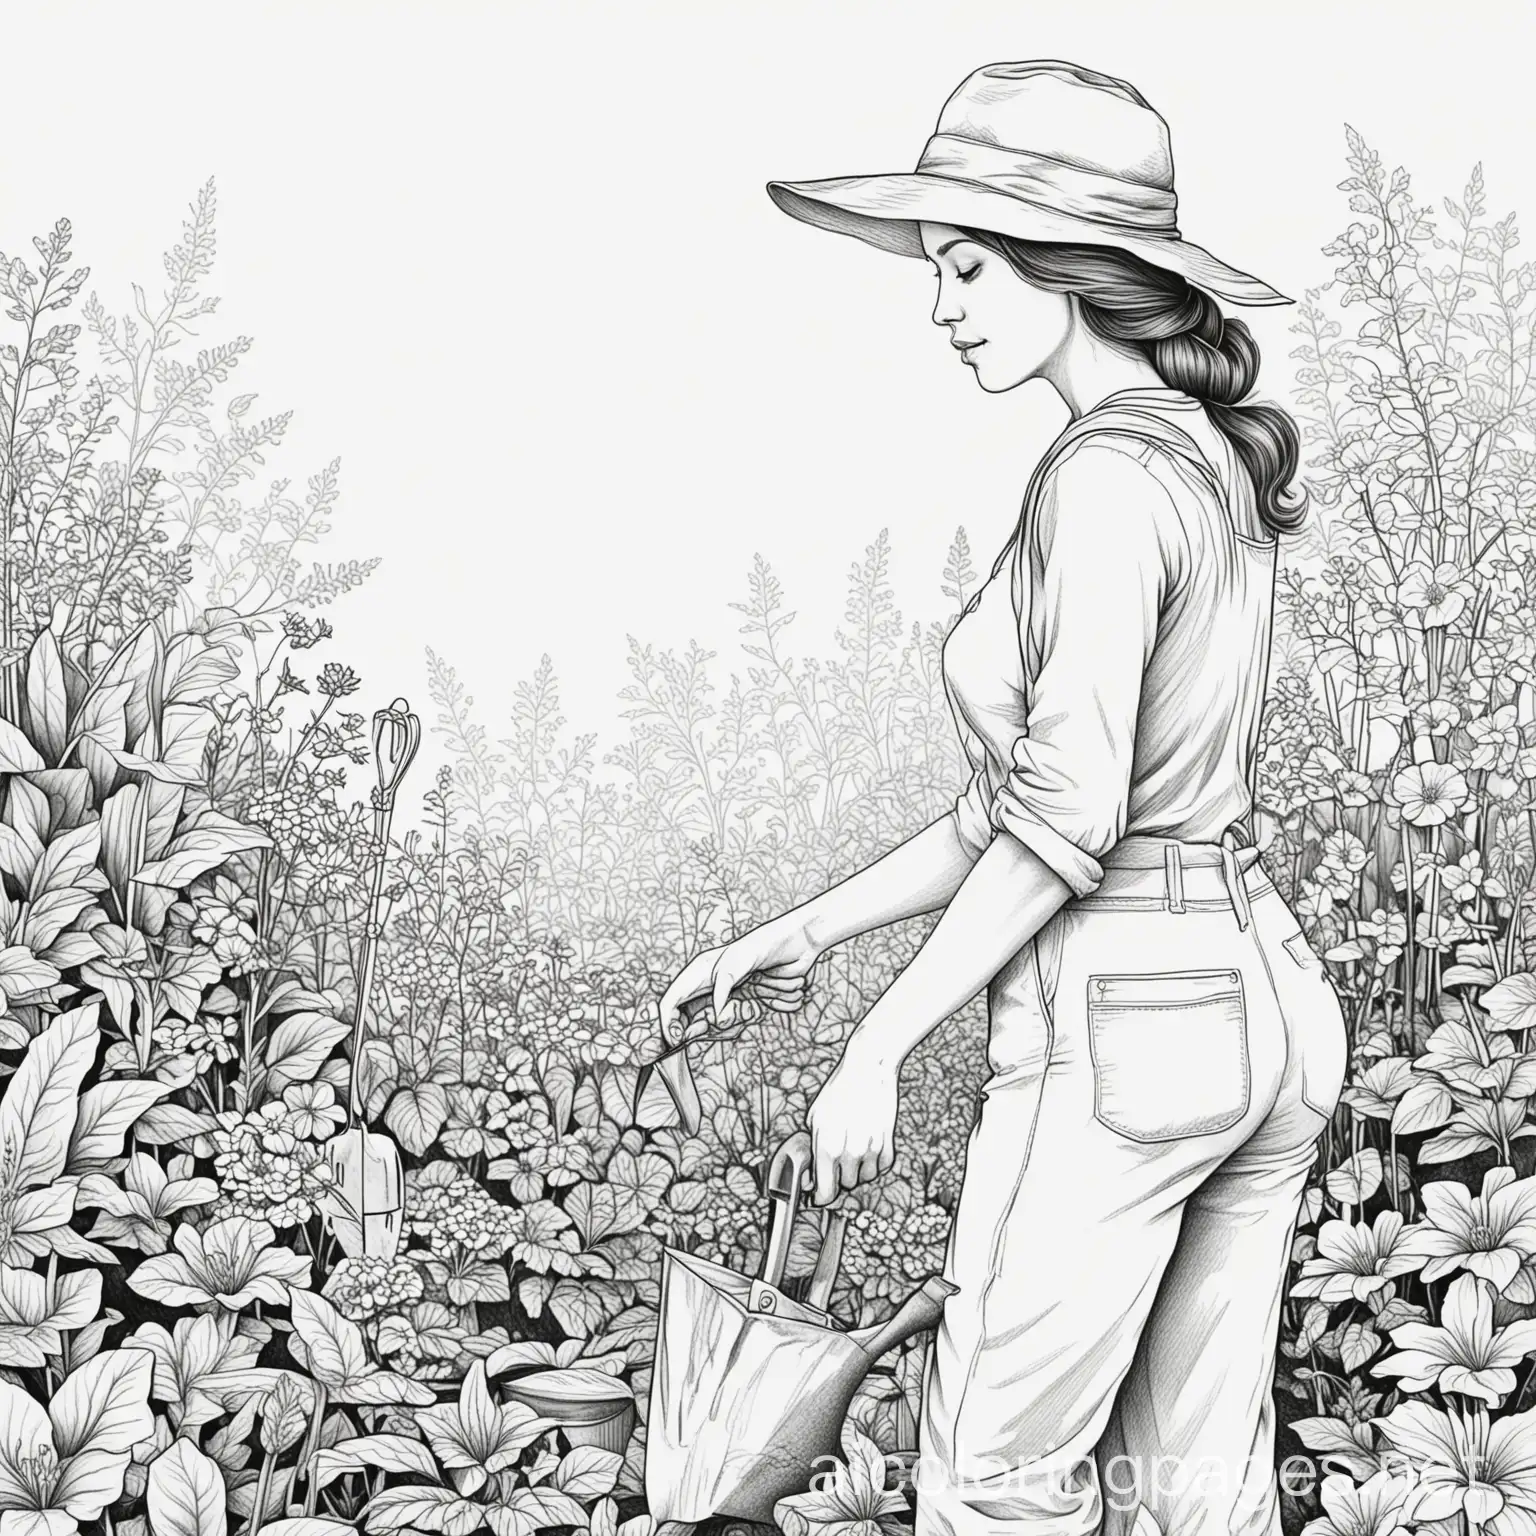 COLORING PAGE OF WOMAN gardening, Coloring Page, black and white, line art, white background, Simplicity, Ample White Space. The background of the coloring page is plain white to make it easy for young children to color within the lines. The outlines of all the subjects are easy to distinguish, making it simple for kids to color without too much difficulty